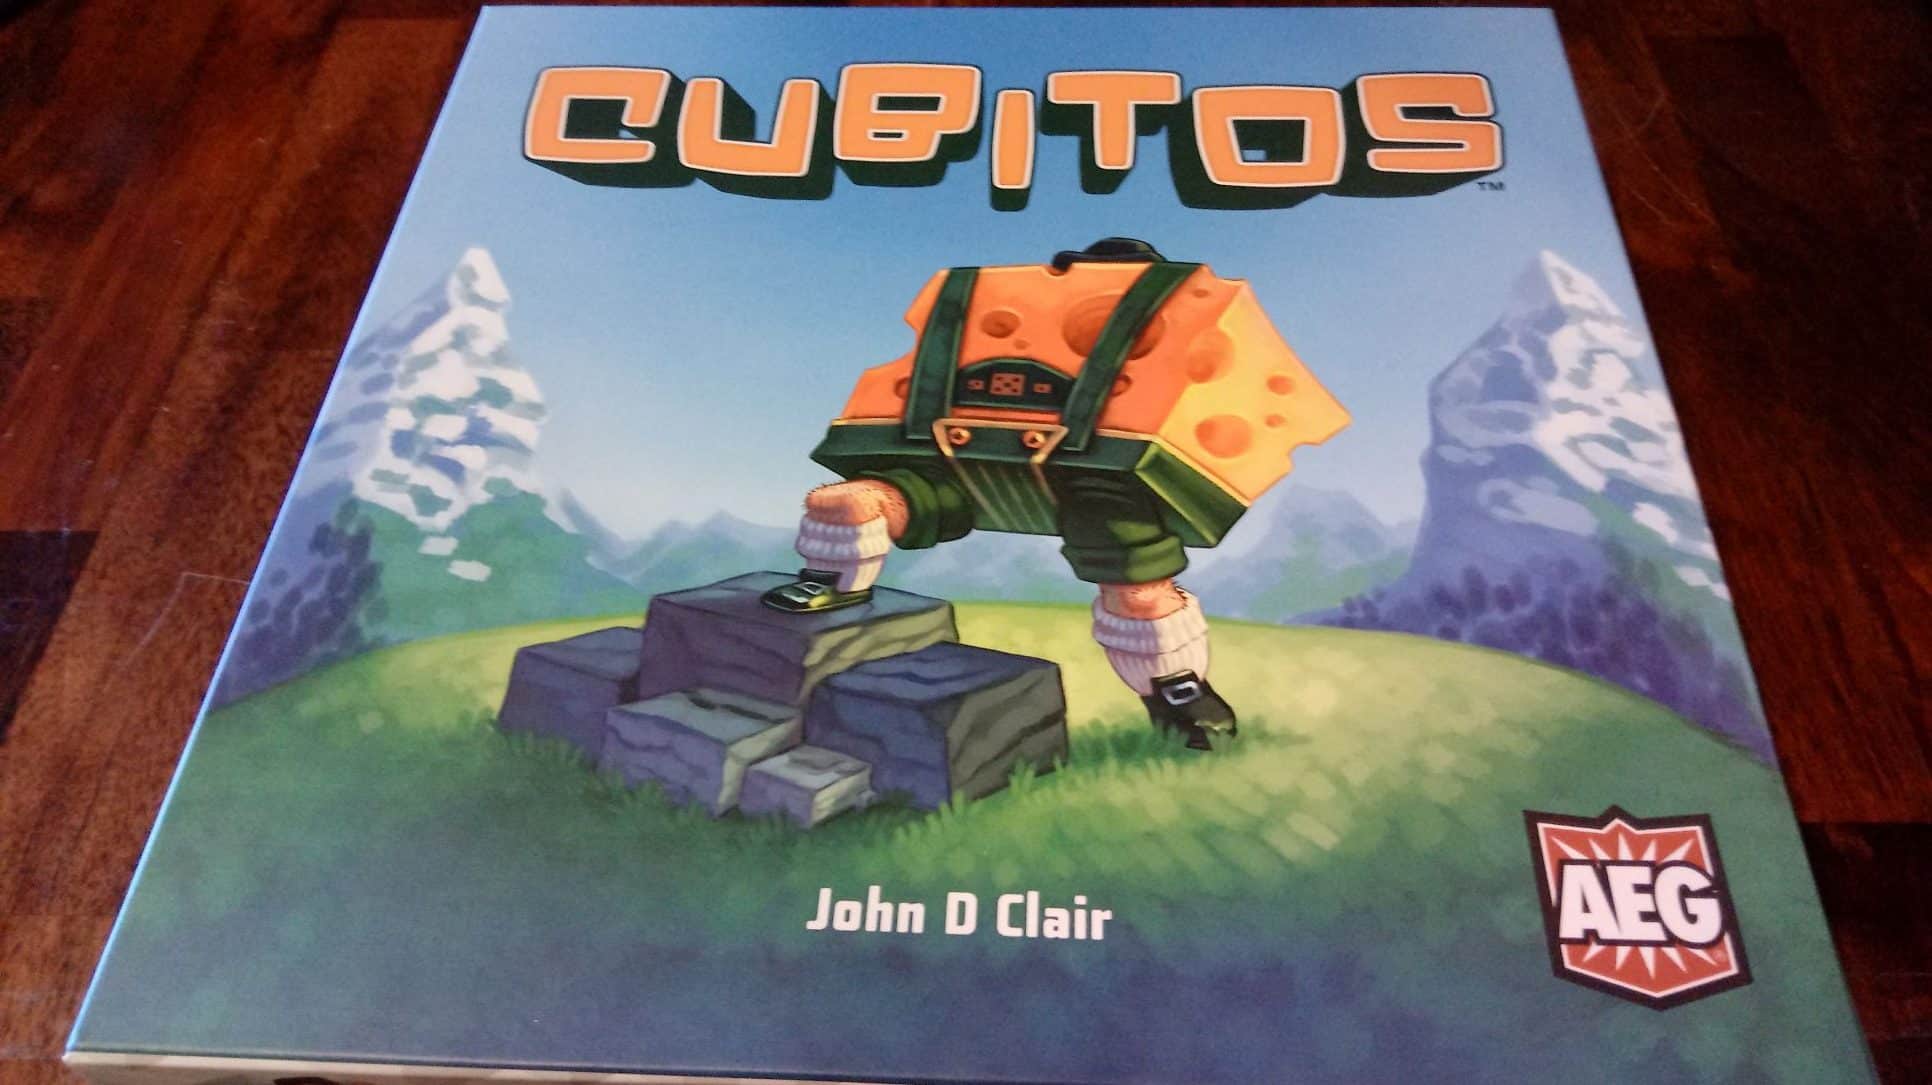 Closeup of the Cubitos box cover on a table.